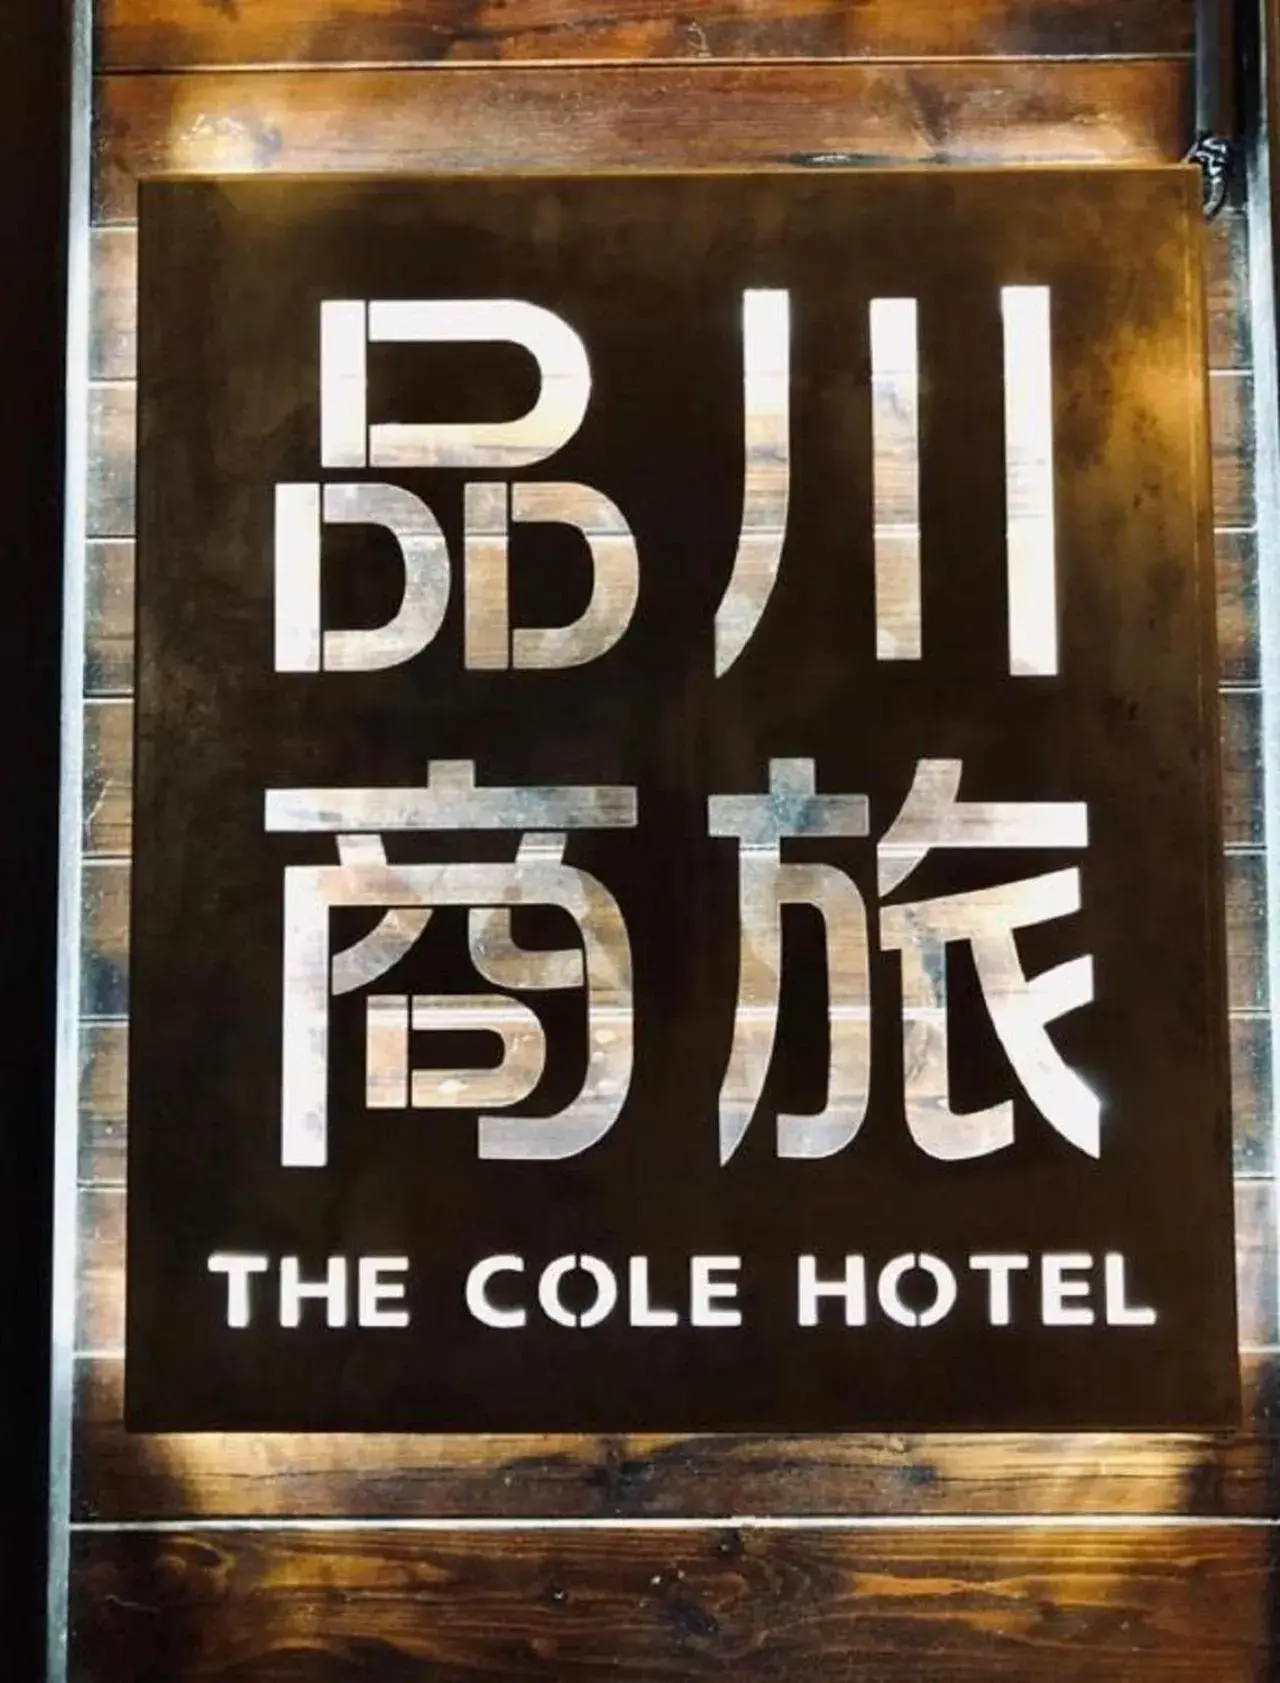 Property logo or sign in The Cole Hotel